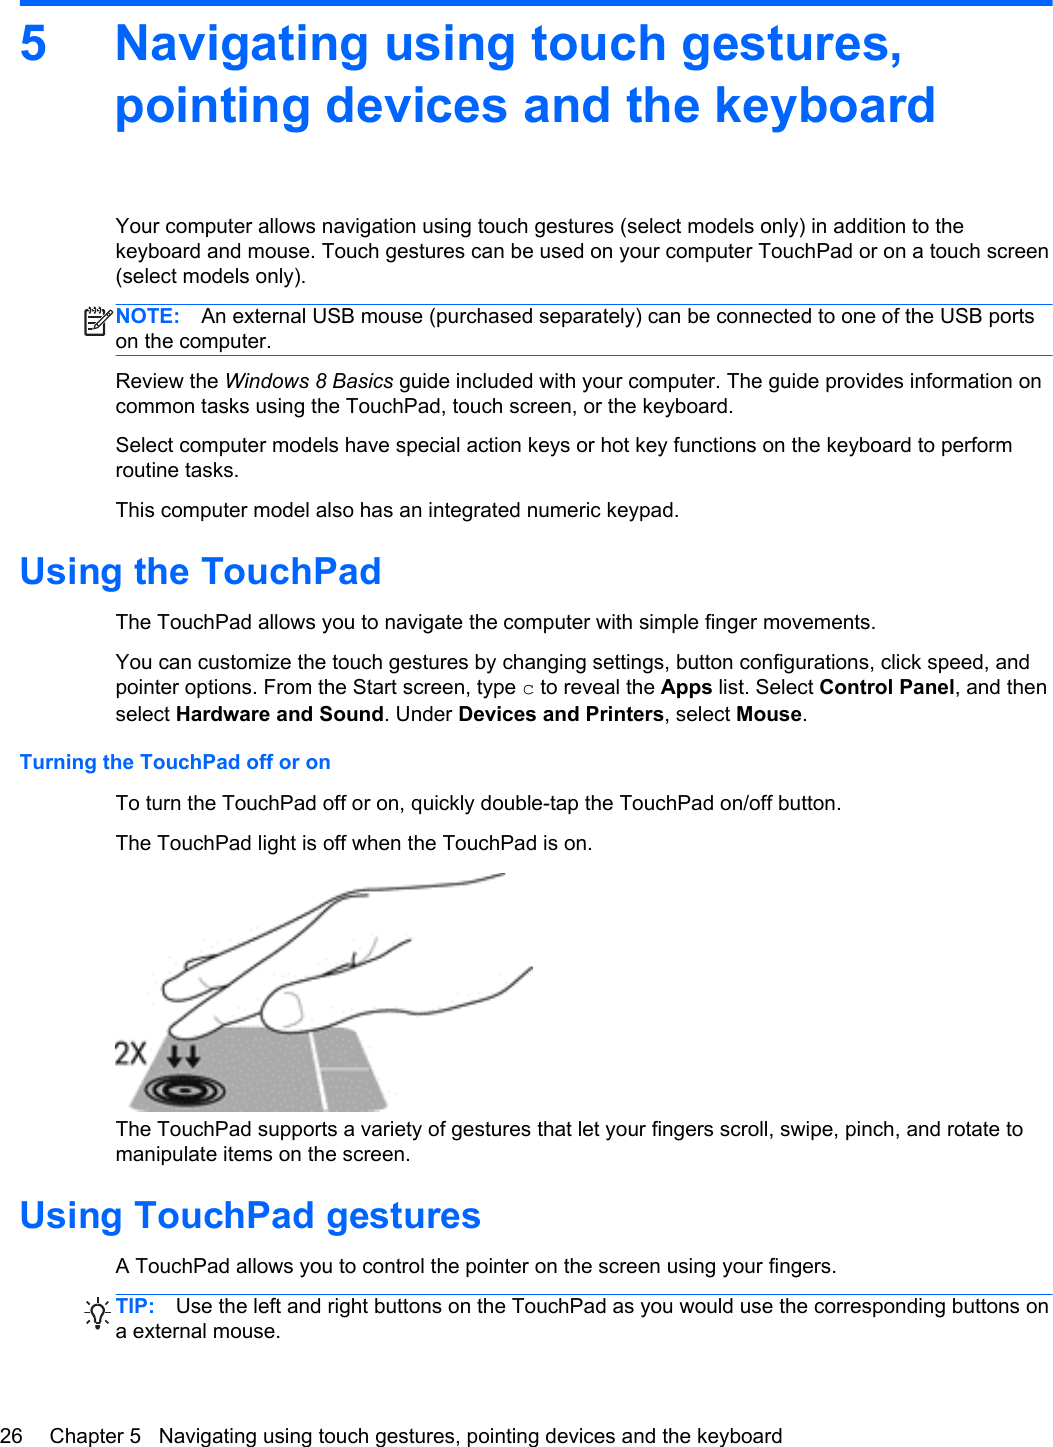 5 Navigating using touch gestures,pointing devices and the keyboardYour computer allows navigation using touch gestures (select models only) in addition to thekeyboard and mouse. Touch gestures can be used on your computer TouchPad or on a touch screen(select models only).NOTE: An external USB mouse (purchased separately) can be connected to one of the USB portson the computer.Review the Windows 8 Basics guide included with your computer. The guide provides information oncommon tasks using the TouchPad, touch screen, or the keyboard.Select computer models have special action keys or hot key functions on the keyboard to performroutine tasks.This computer model also has an integrated numeric keypad.Using the TouchPadThe TouchPad allows you to navigate the computer with simple finger movements.You can customize the touch gestures by changing settings, button configurations, click speed, andpointer options. From the Start screen, type c to reveal the Apps list. Select Control Panel, and thenselect Hardware and Sound. Under Devices and Printers, select Mouse.Turning the TouchPad off or onTo turn the TouchPad off or on, quickly double-tap the TouchPad on/off button.The TouchPad light is off when the TouchPad is on.The TouchPad supports a variety of gestures that let your fingers scroll, swipe, pinch, and rotate tomanipulate items on the screen.Using TouchPad gesturesA TouchPad allows you to control the pointer on the screen using your fingers.TIP: Use the left and right buttons on the TouchPad as you would use the corresponding buttons ona external mouse.26 Chapter 5   Navigating using touch gestures, pointing devices and the keyboard